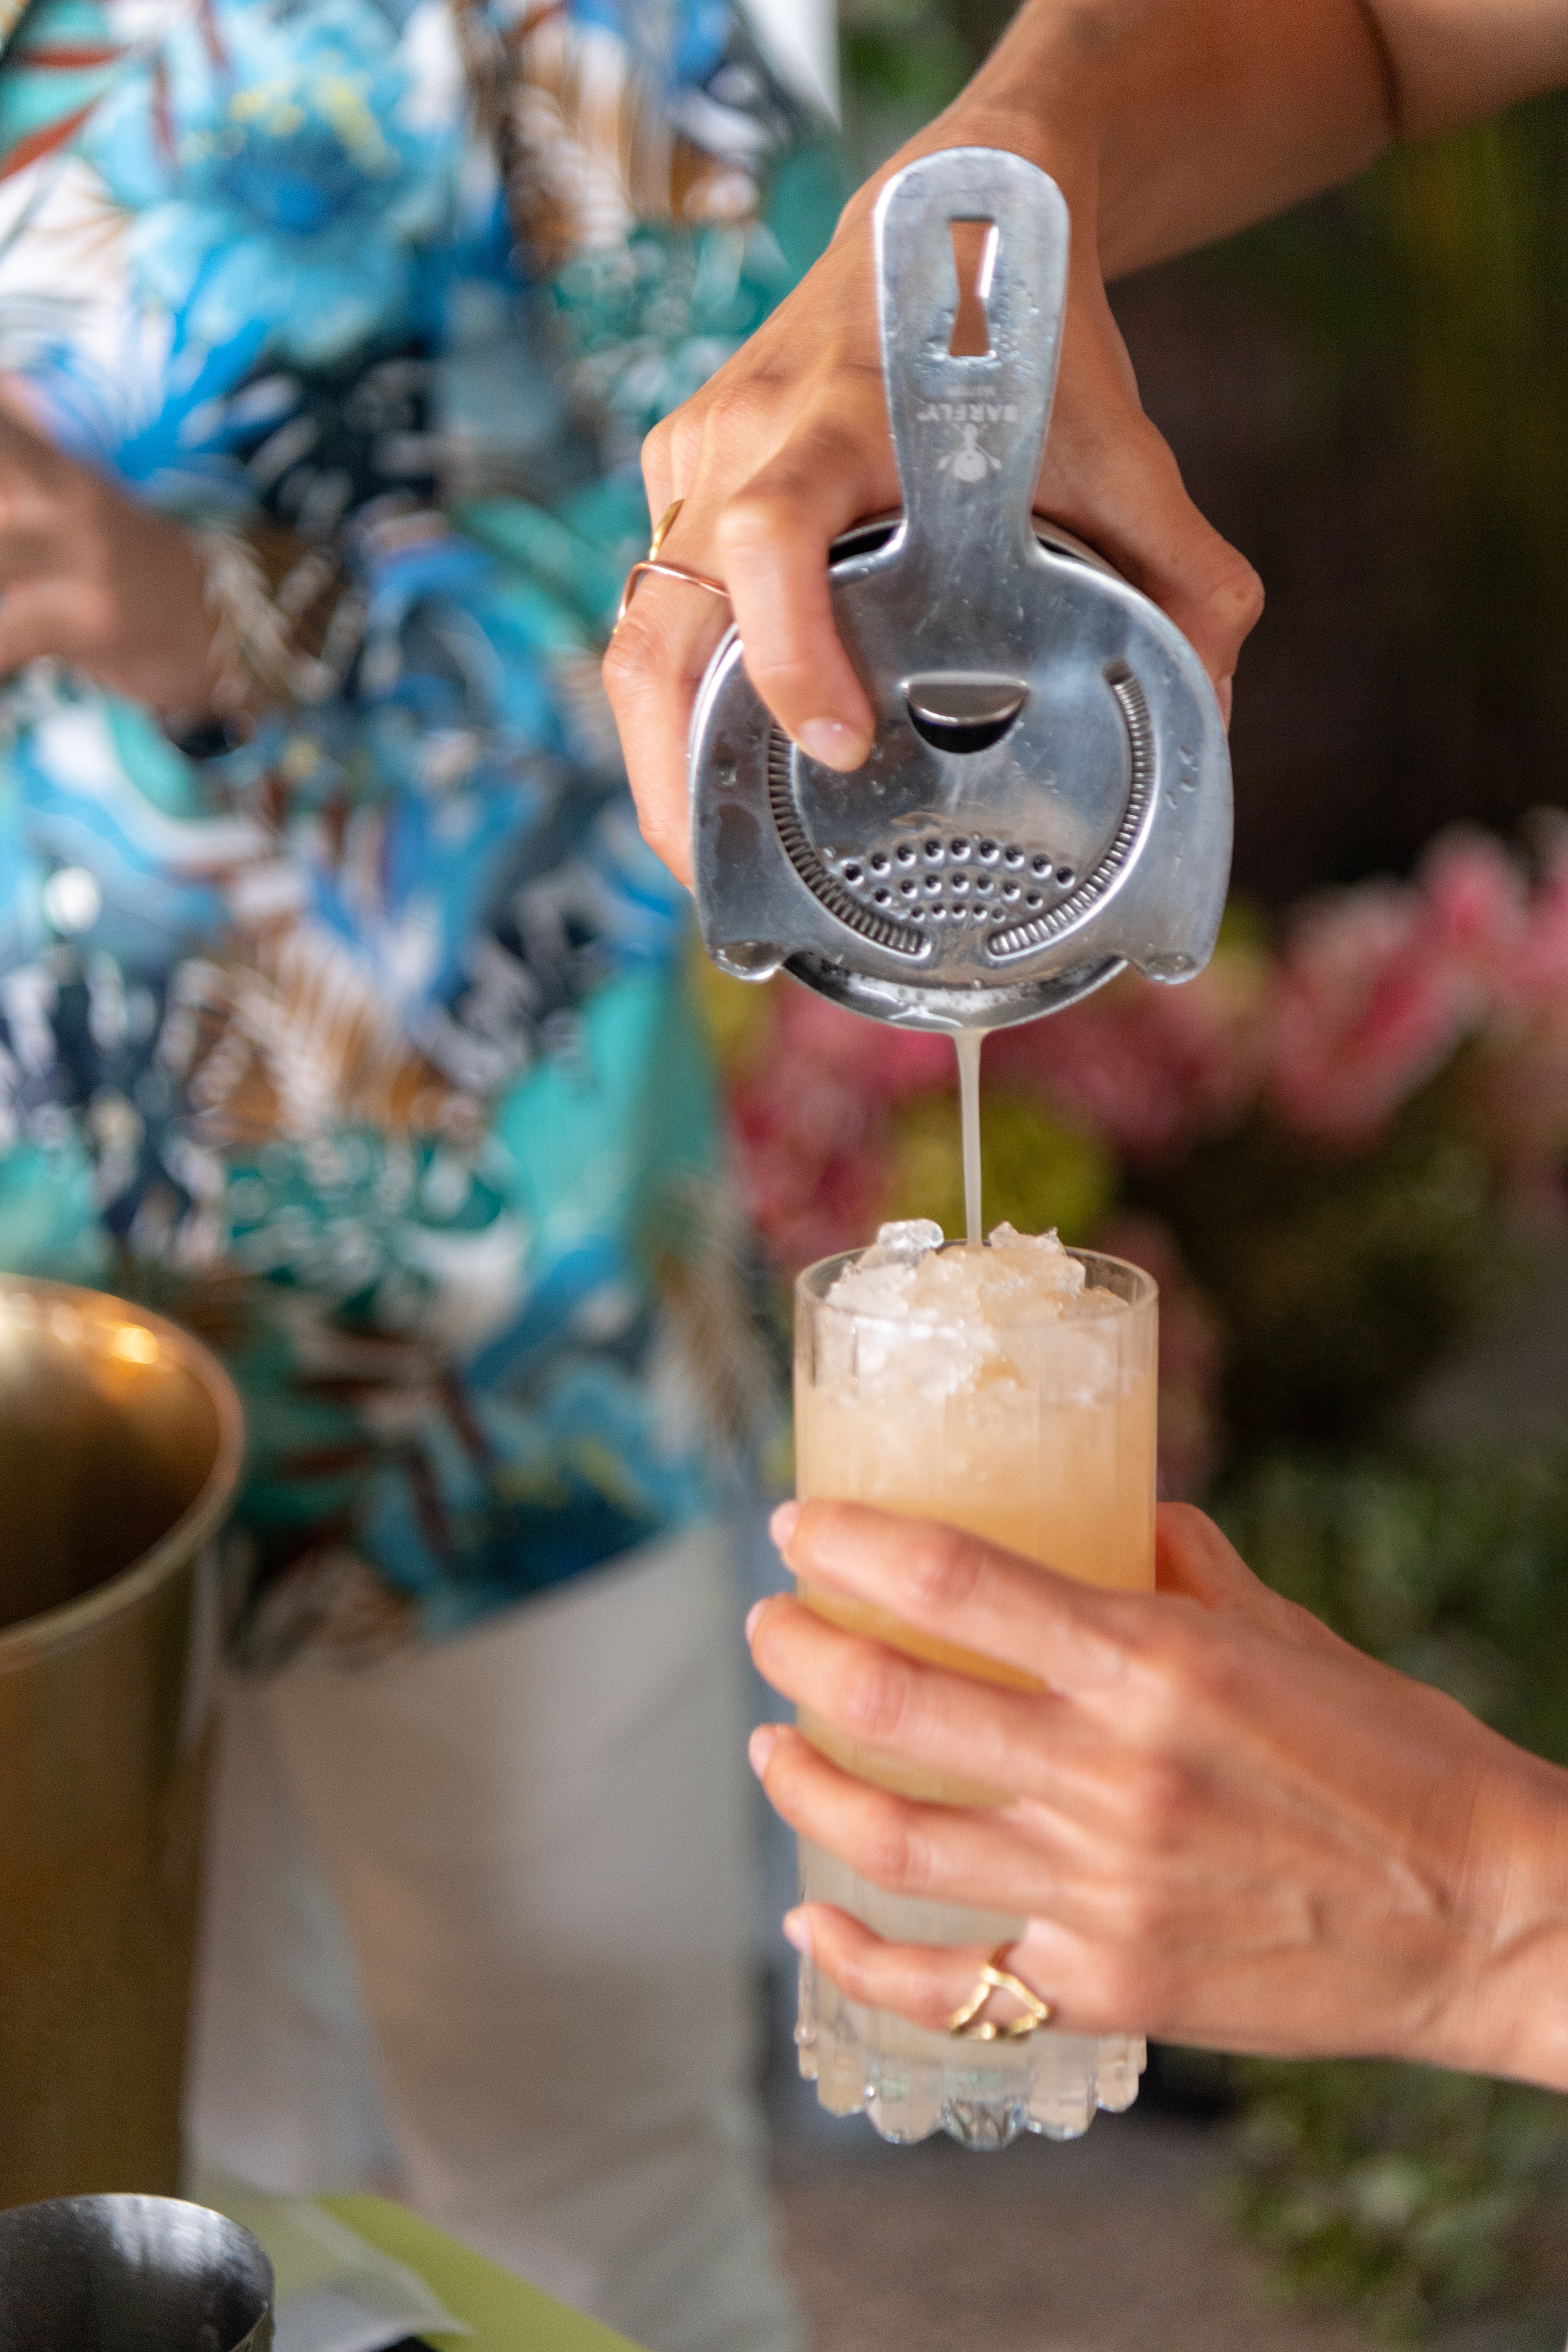 Woman pouring a cocktail into a glass from a metal cocktail shaker